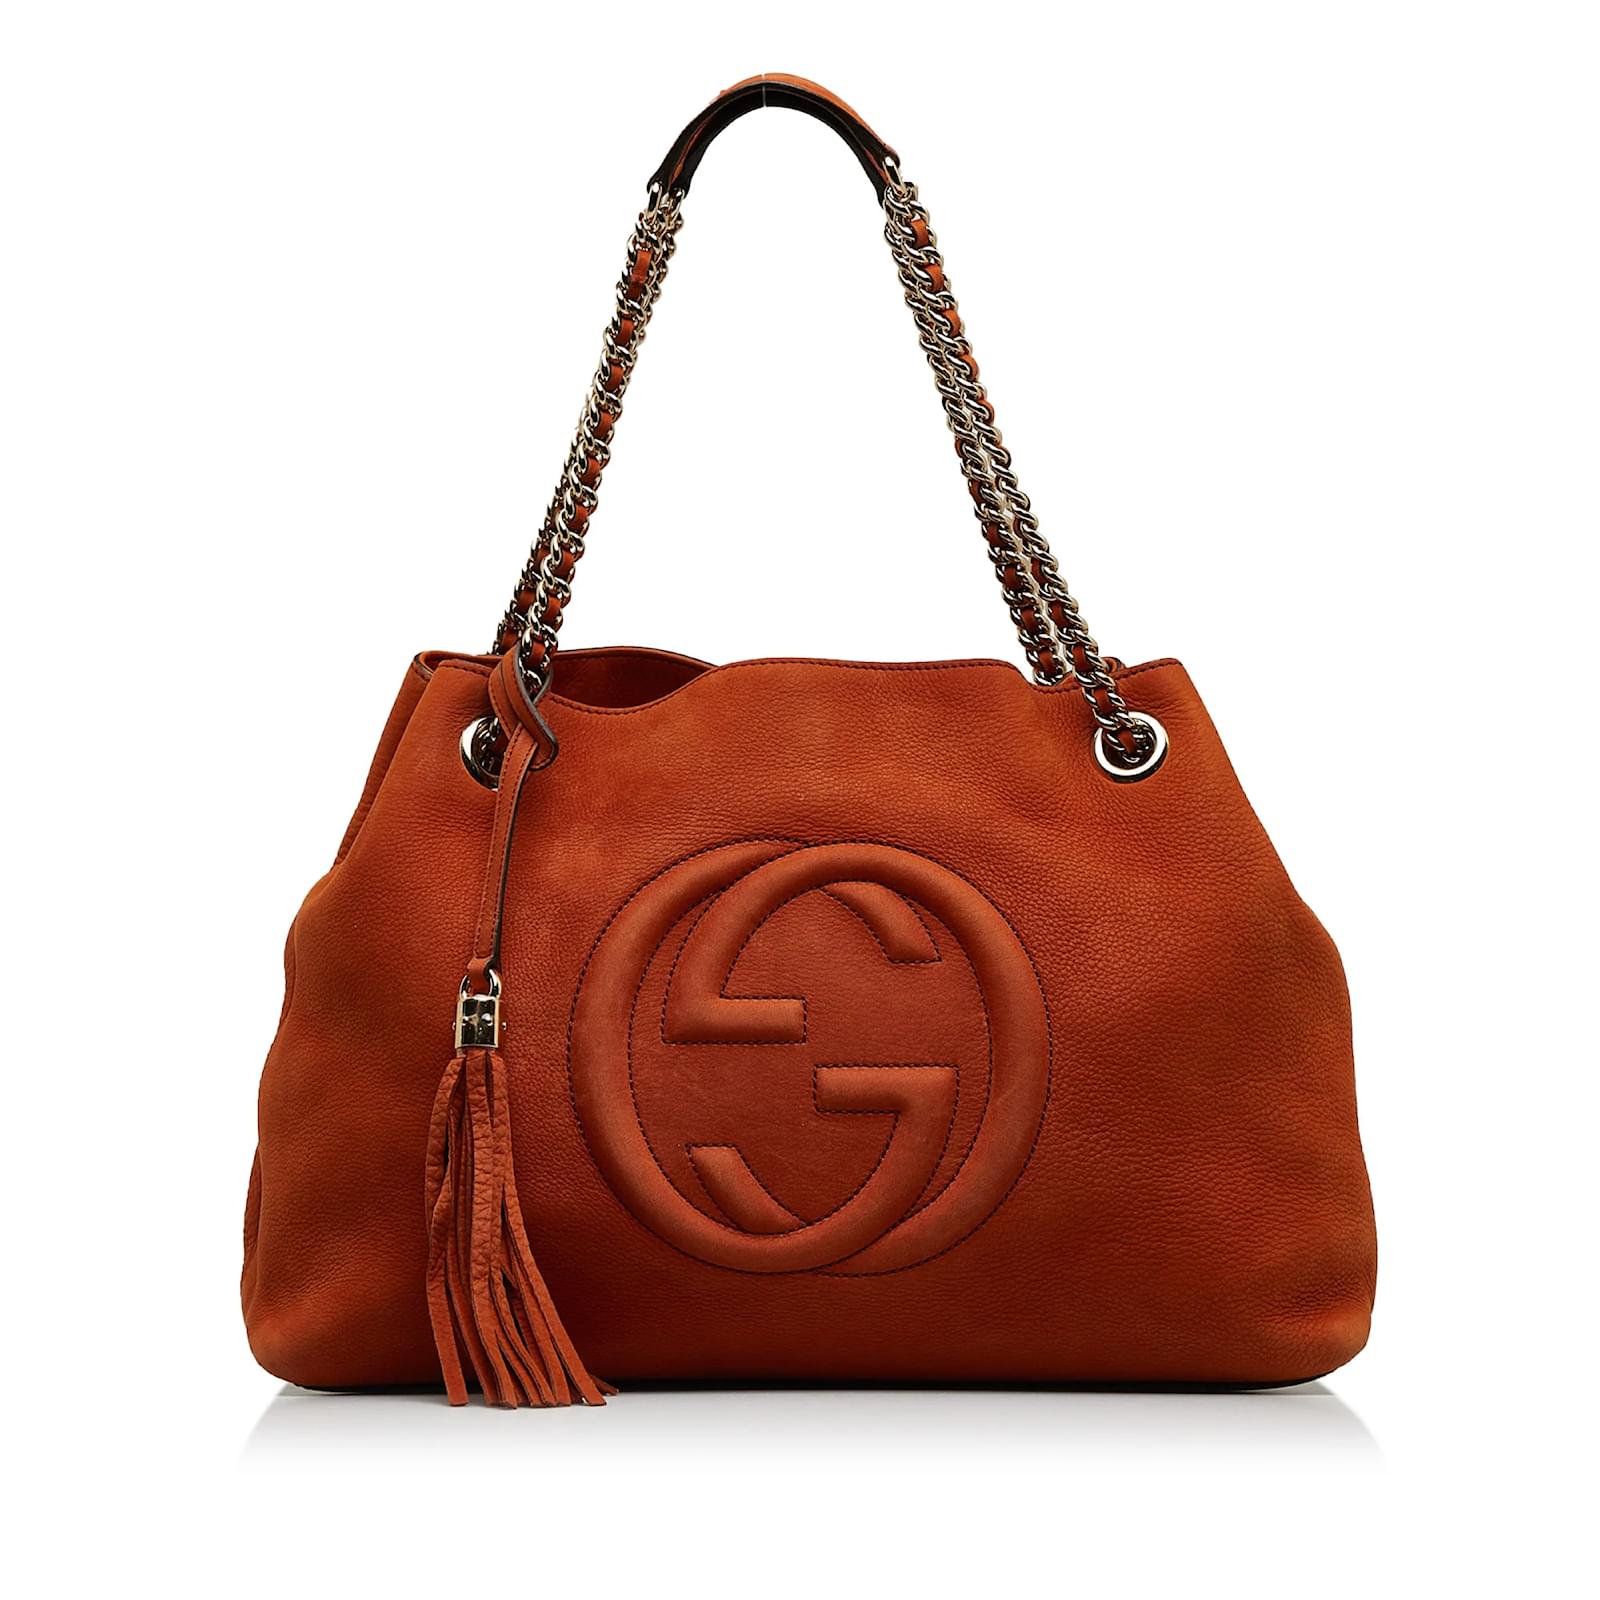 GUCCI #36716 Orange Soho Calfskin Leather Medium Chain-Strap Tote Bag – ALL  YOUR BLISS